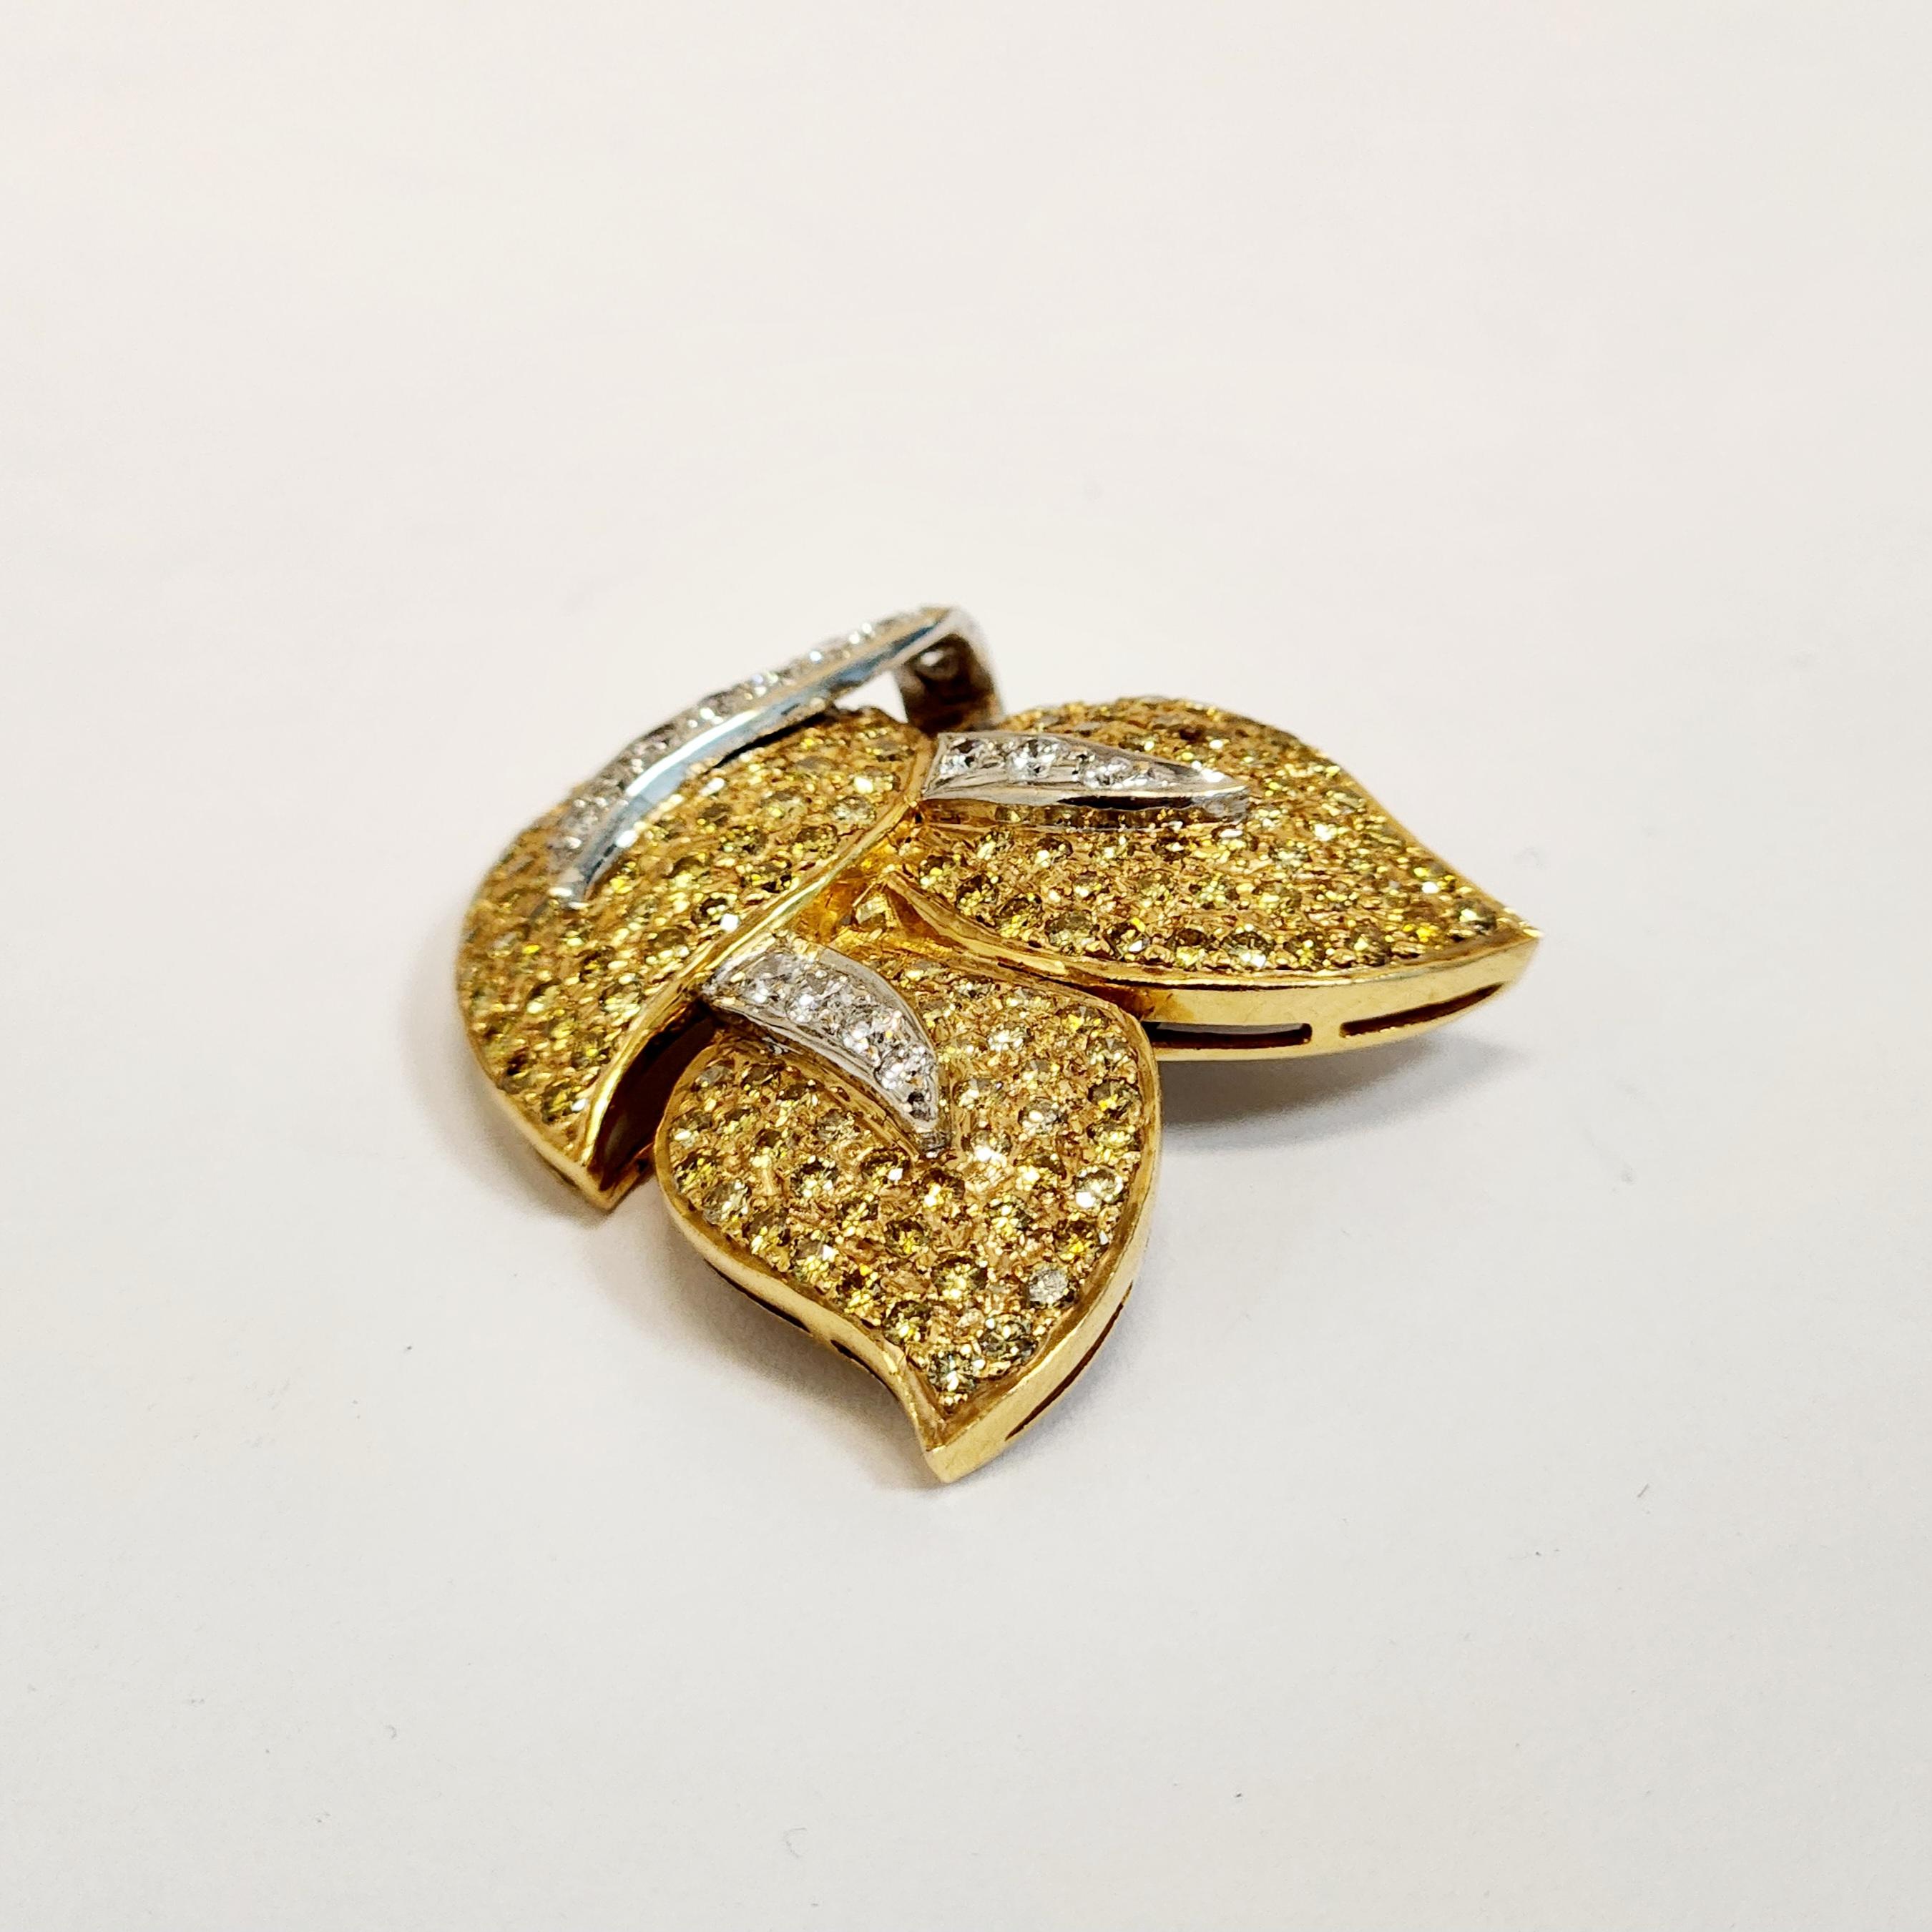 This exquisite pendant features a beautiful design of three leaf shapes crafted with sparkling yellow diamonds, complemented by stems of round white diamonds. The pendant is set in a stunning combination of 18K white and yellow gold, adding to its